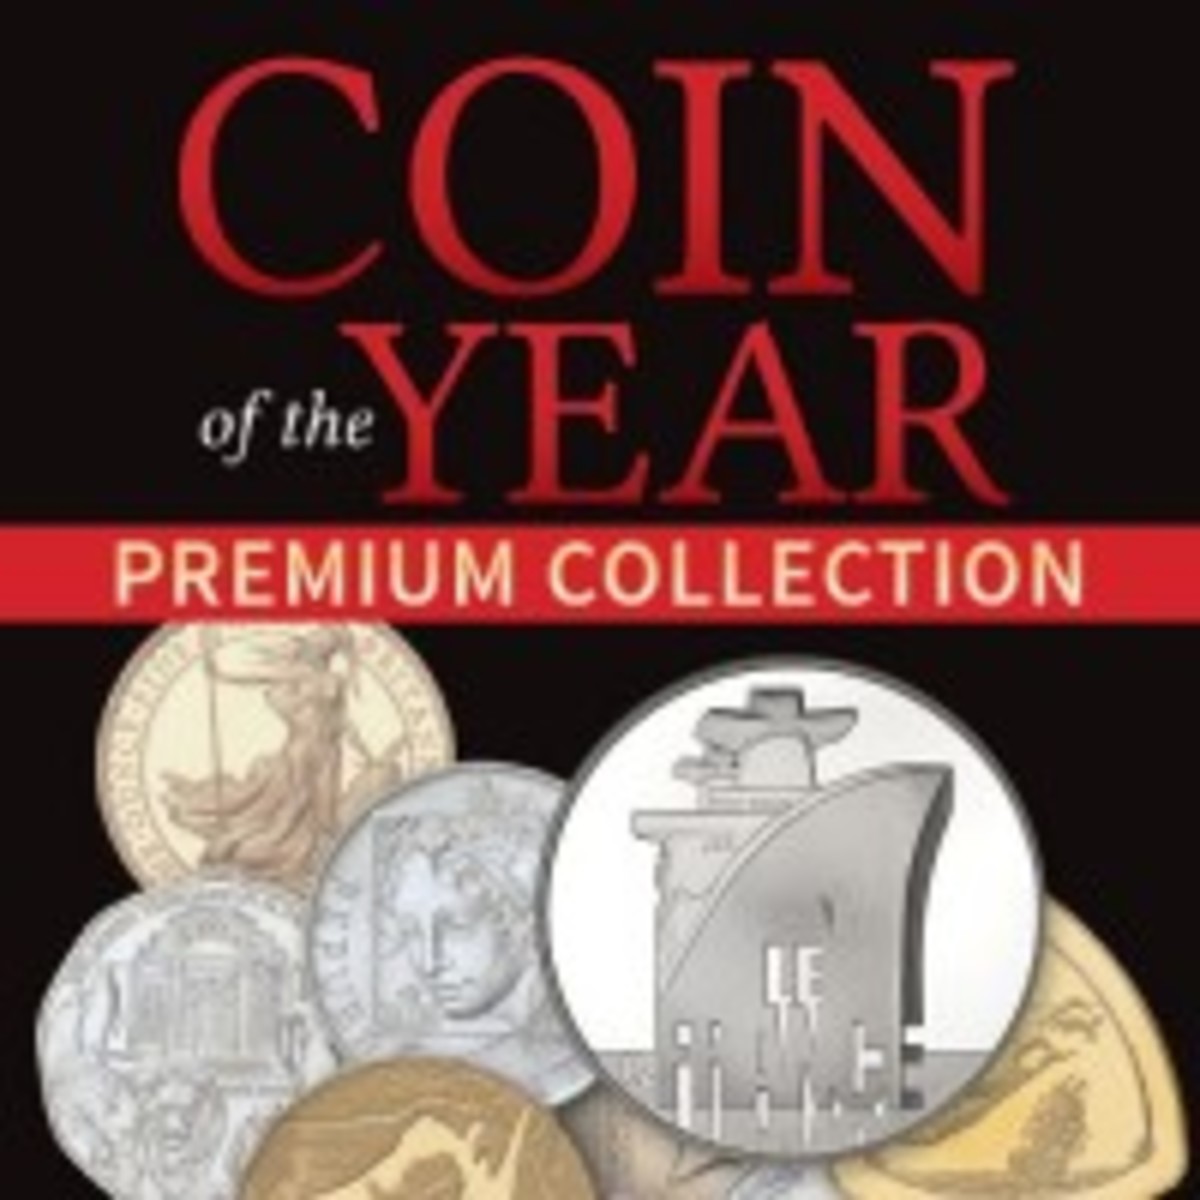 Order the Coin of the Year Premium Collection to see some world famous coins!